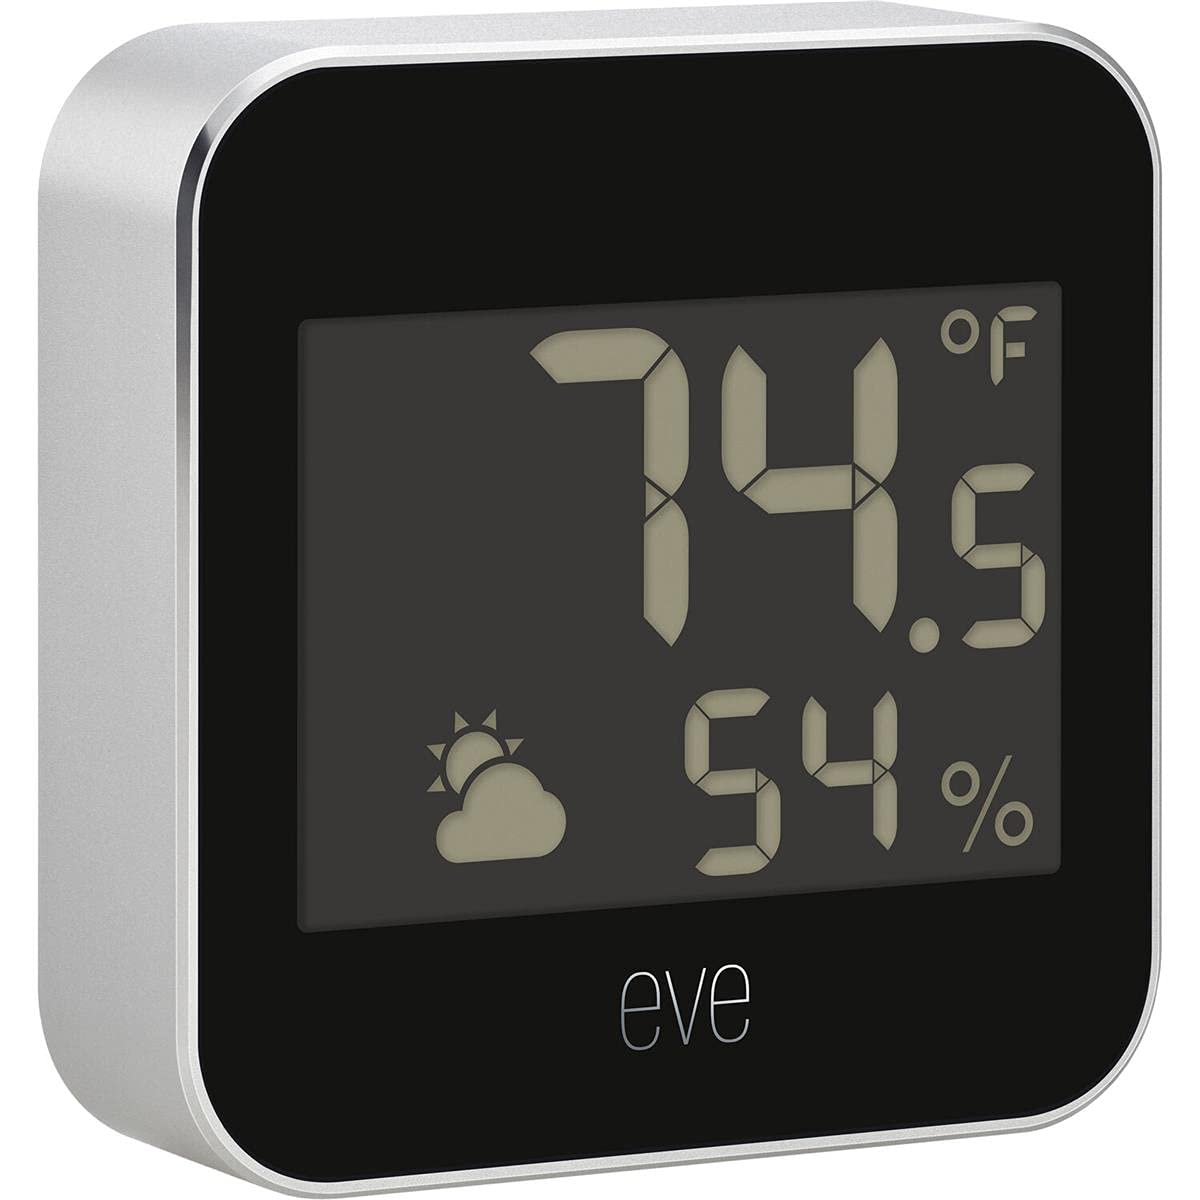 Eve Weather - Apple HomeKit Smart Home, Connected Outdoor Weather Station for Tracking Temperature, Humidity, & Barometric Pressure, Precision Sensors, Wireless, Bluetooth & Thread